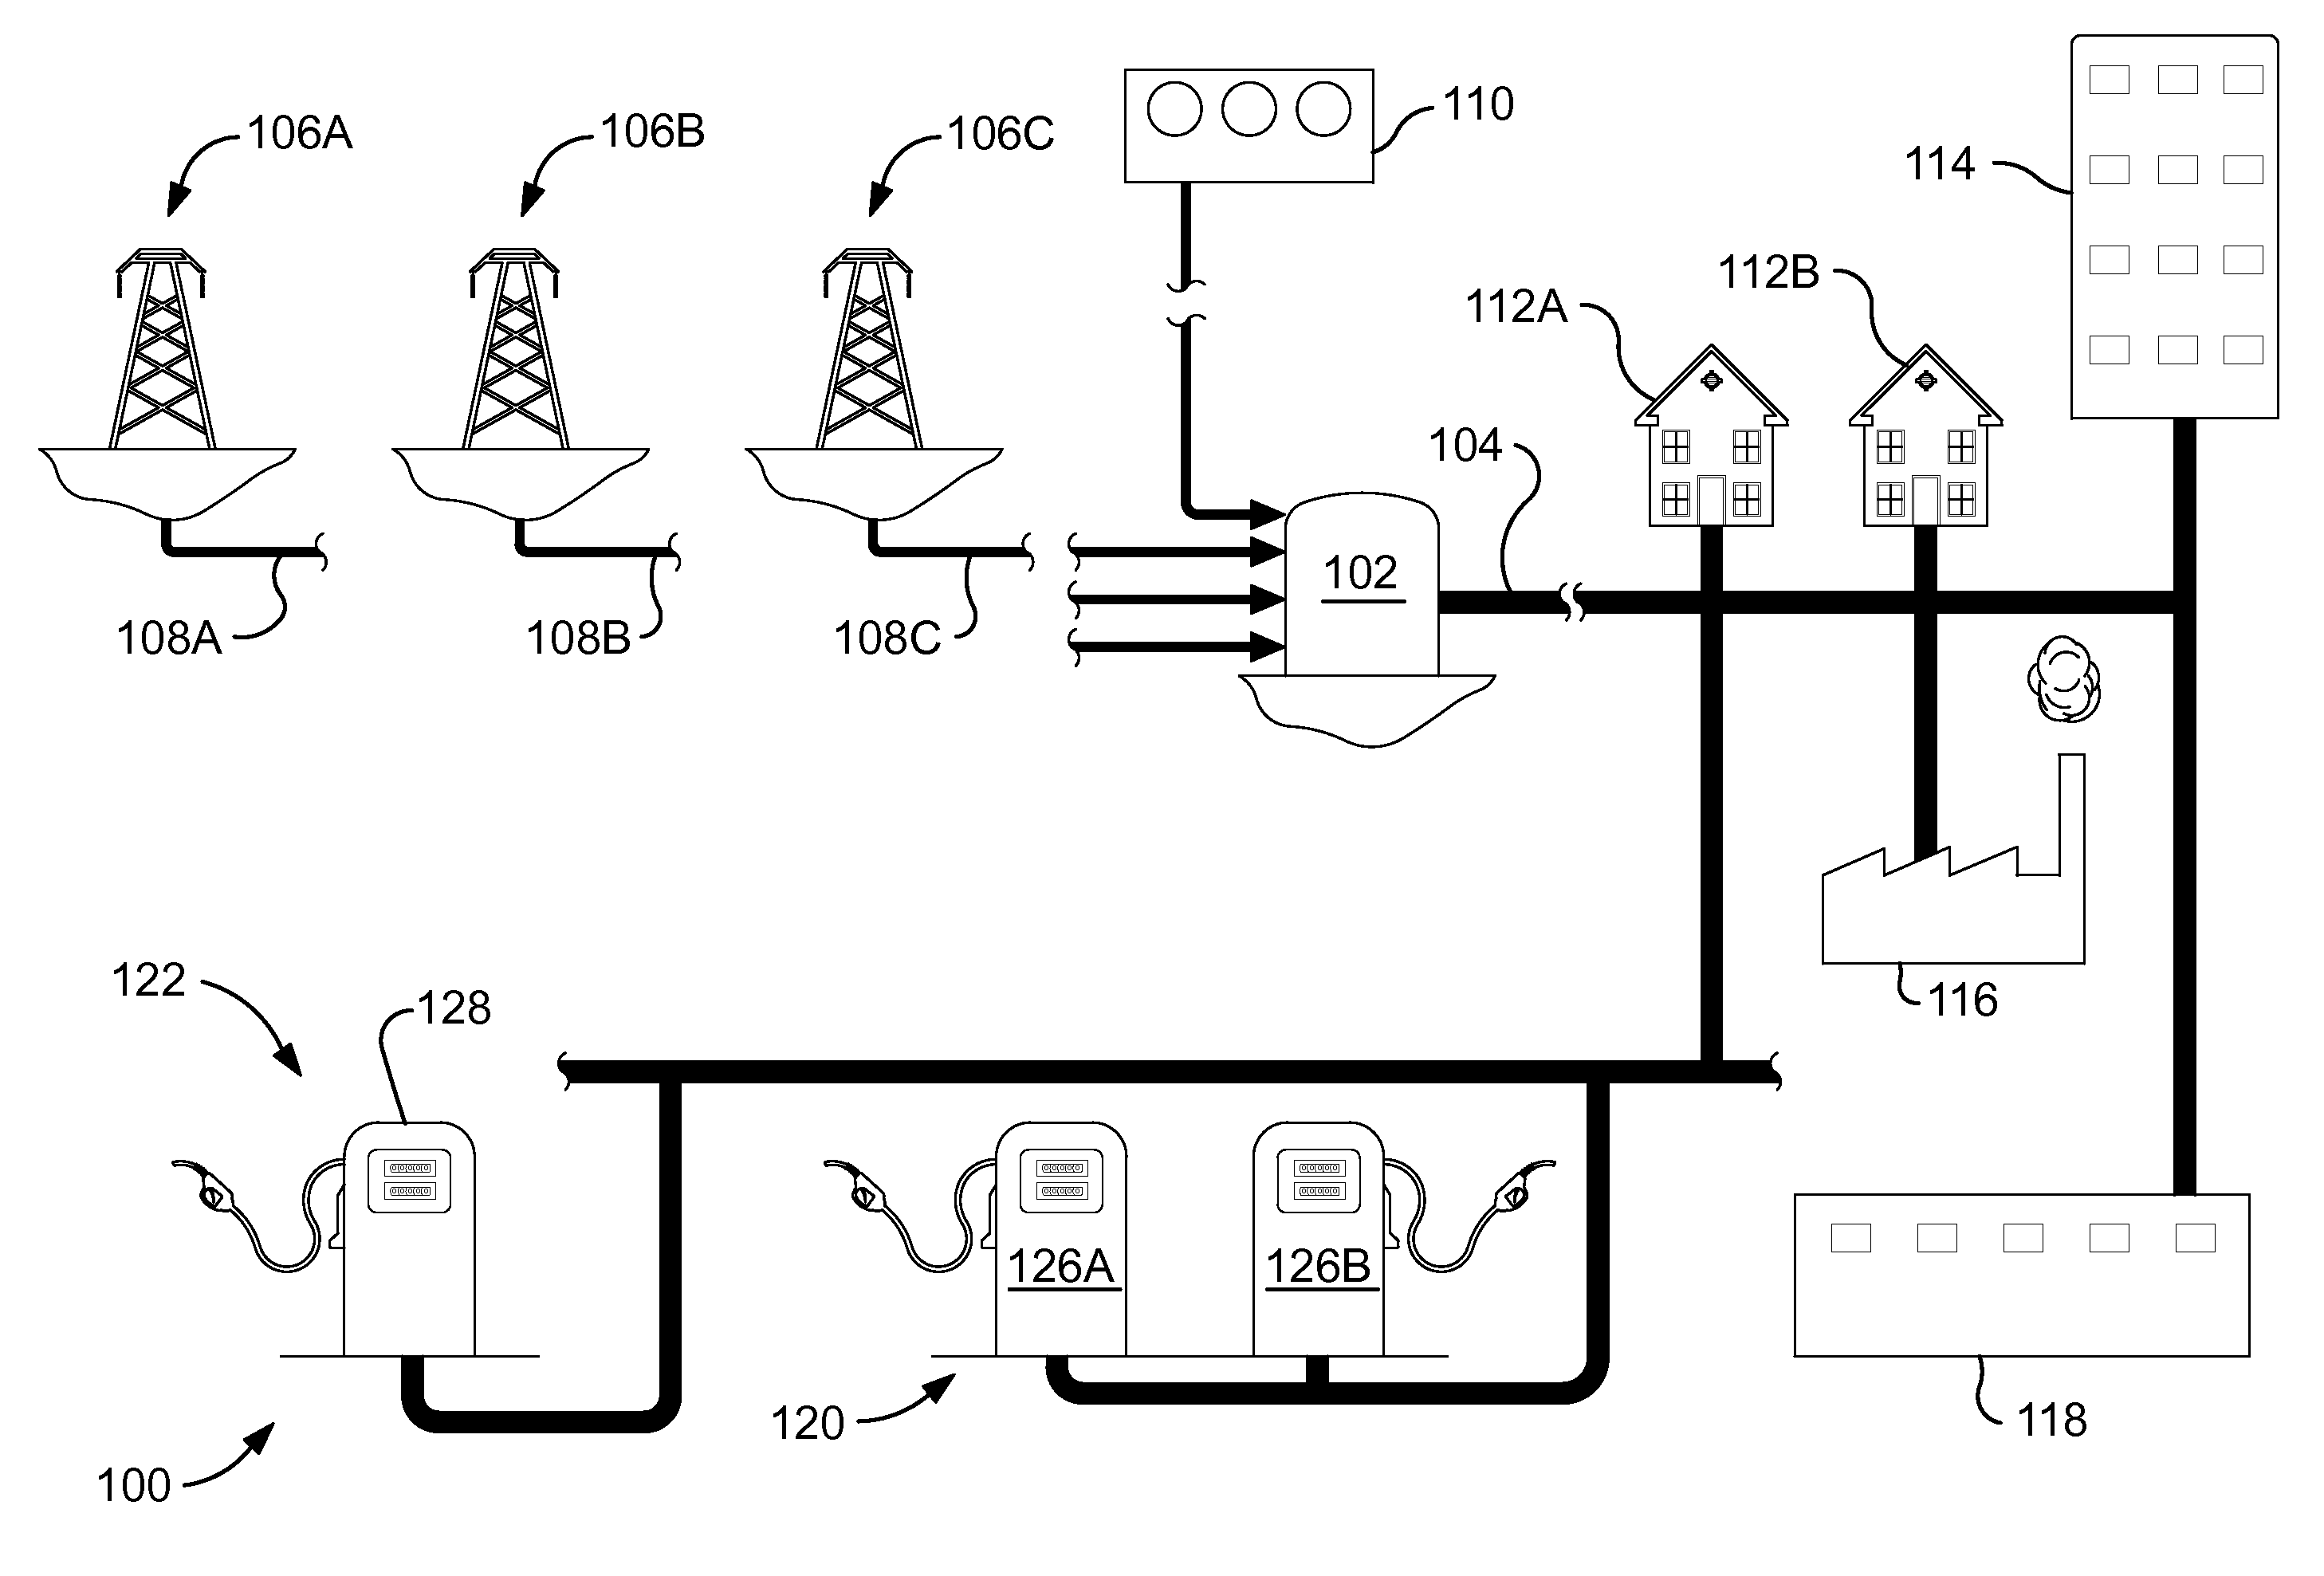 Hydrogen generation and distribution system